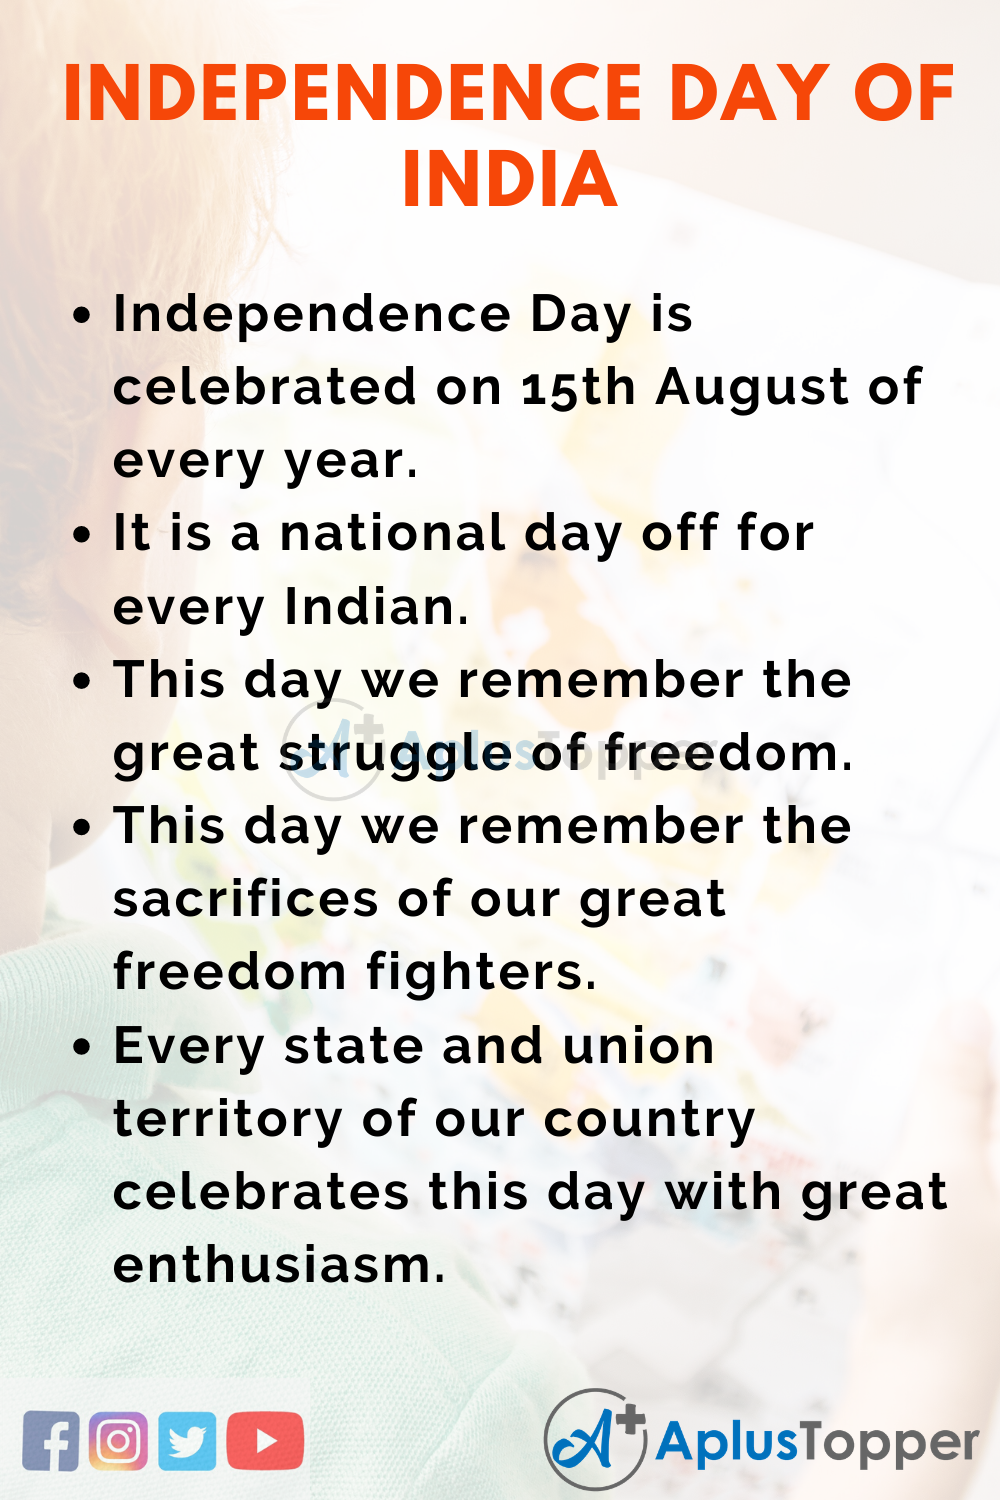 essay writing on independence day in hindi